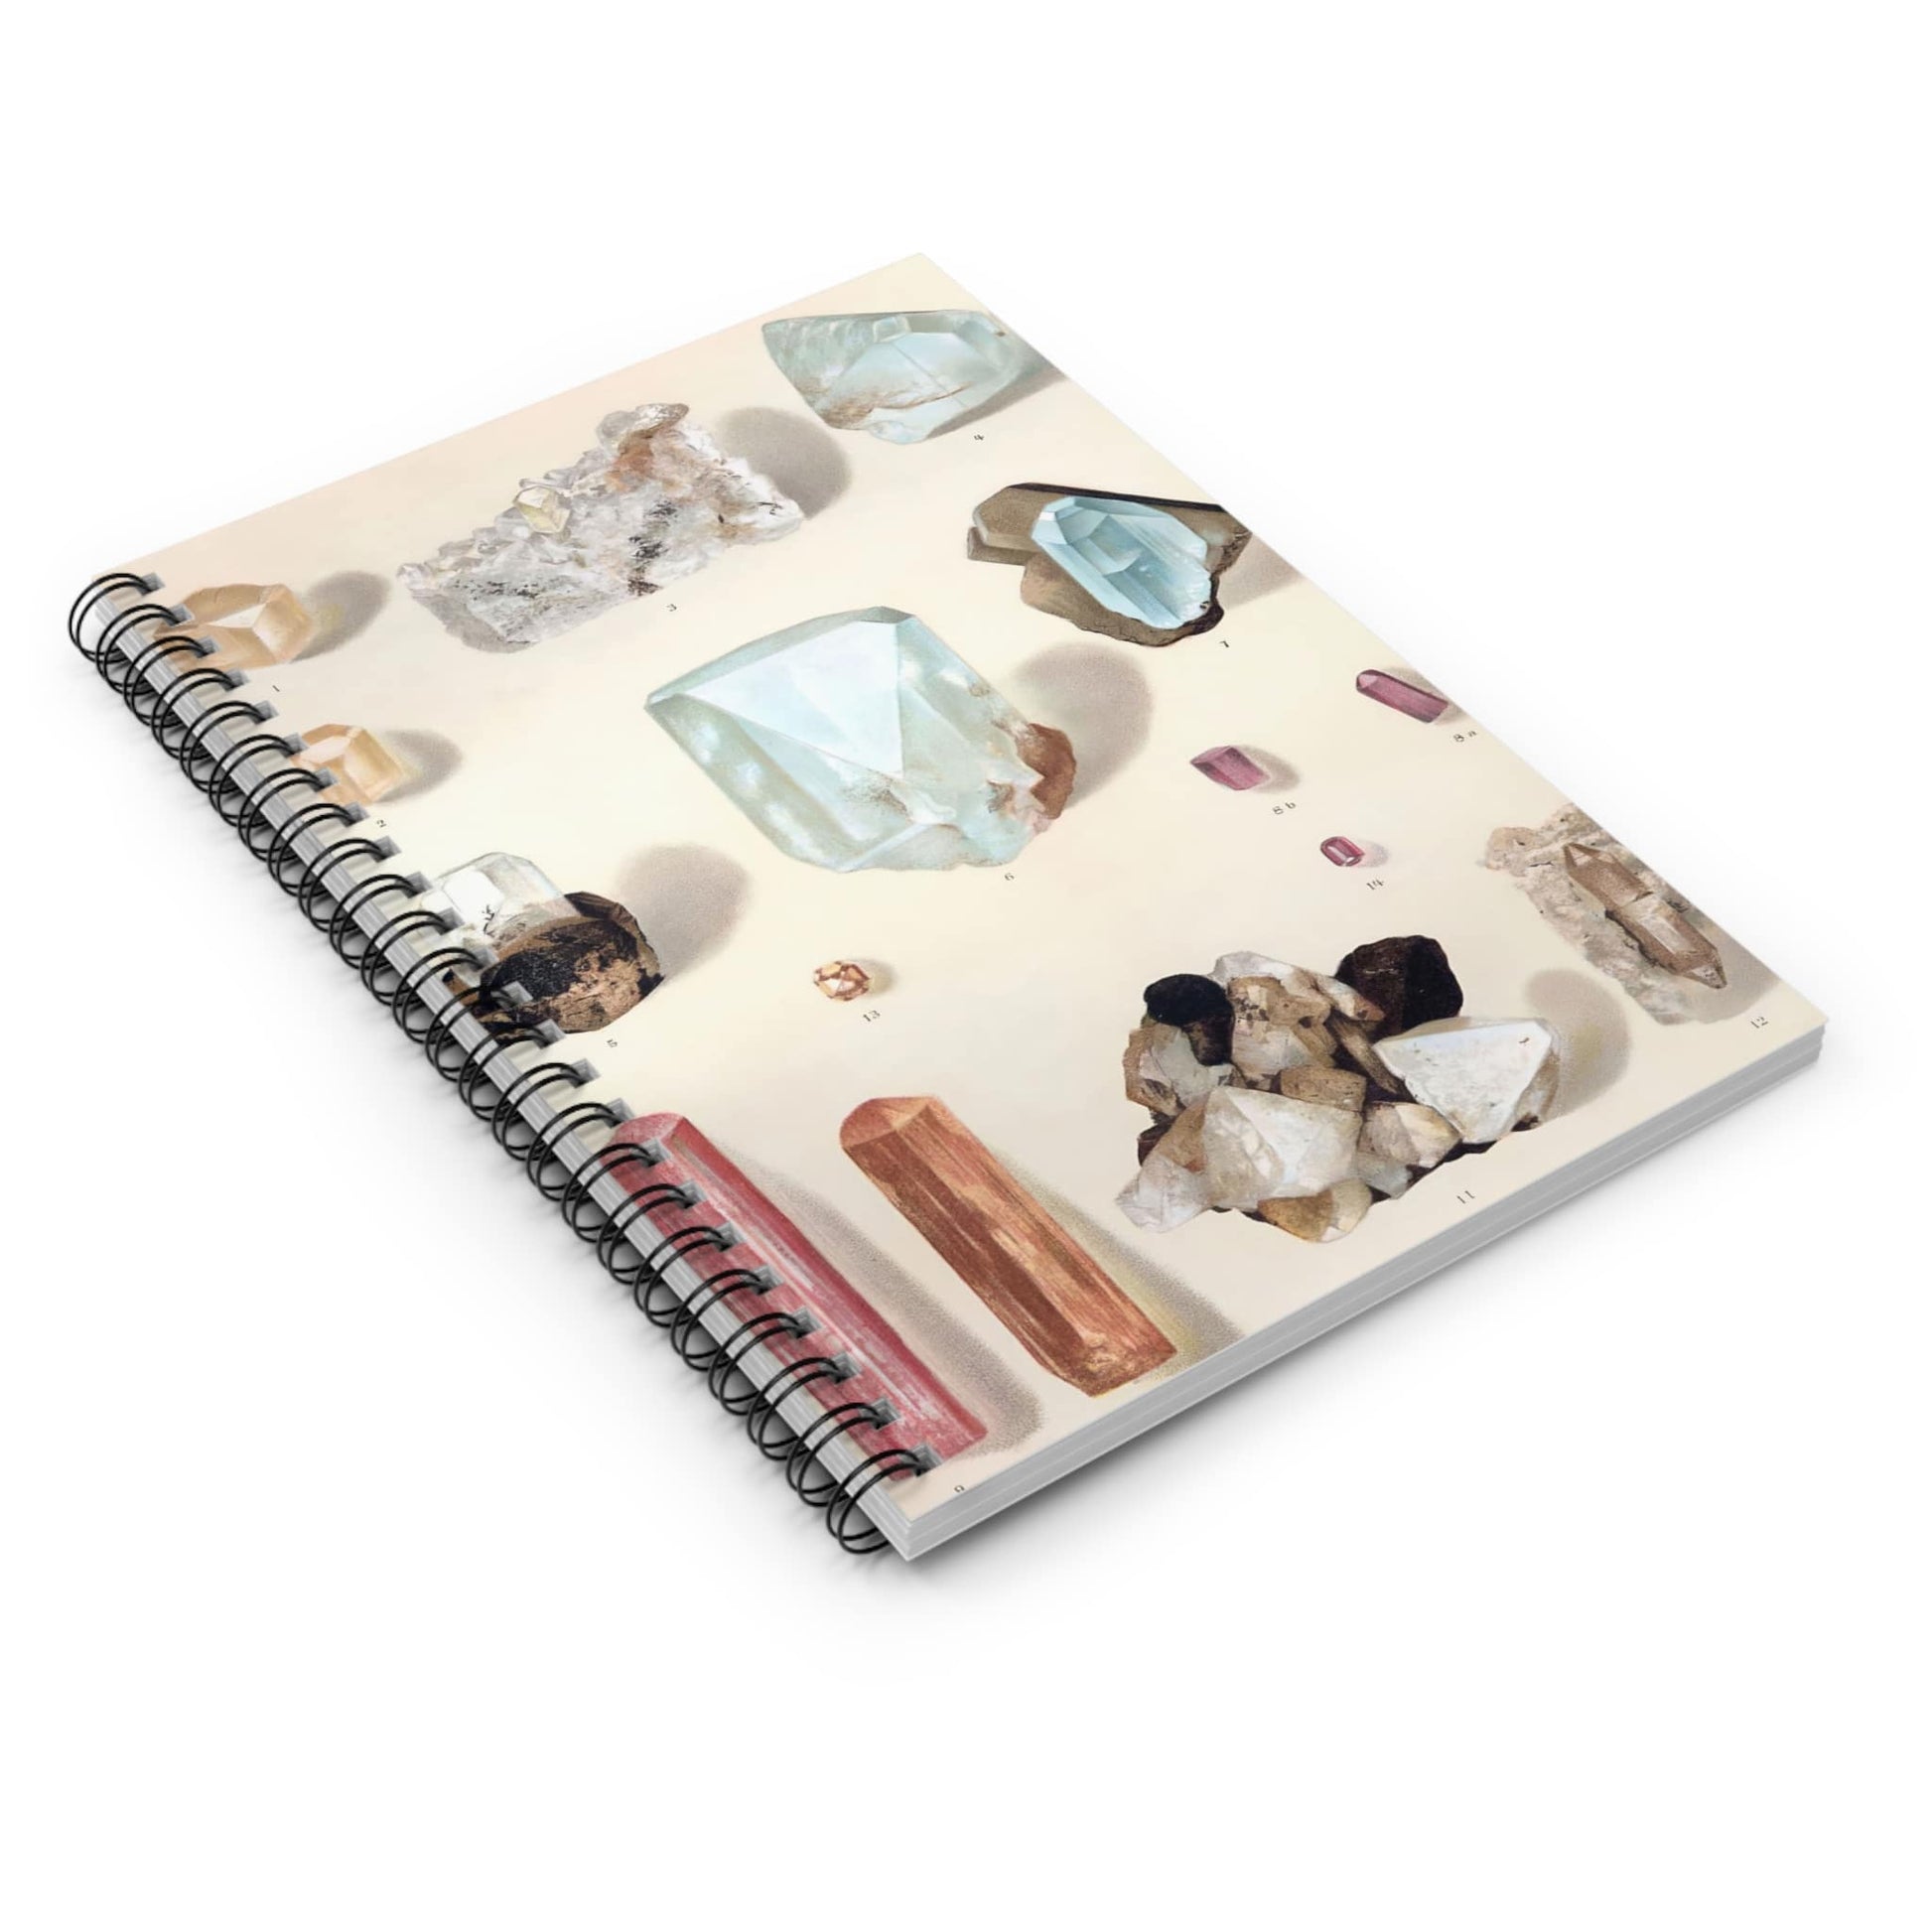 Vintage Crystals and Gemstones Spiral Notebook Laying Flat on White Surface